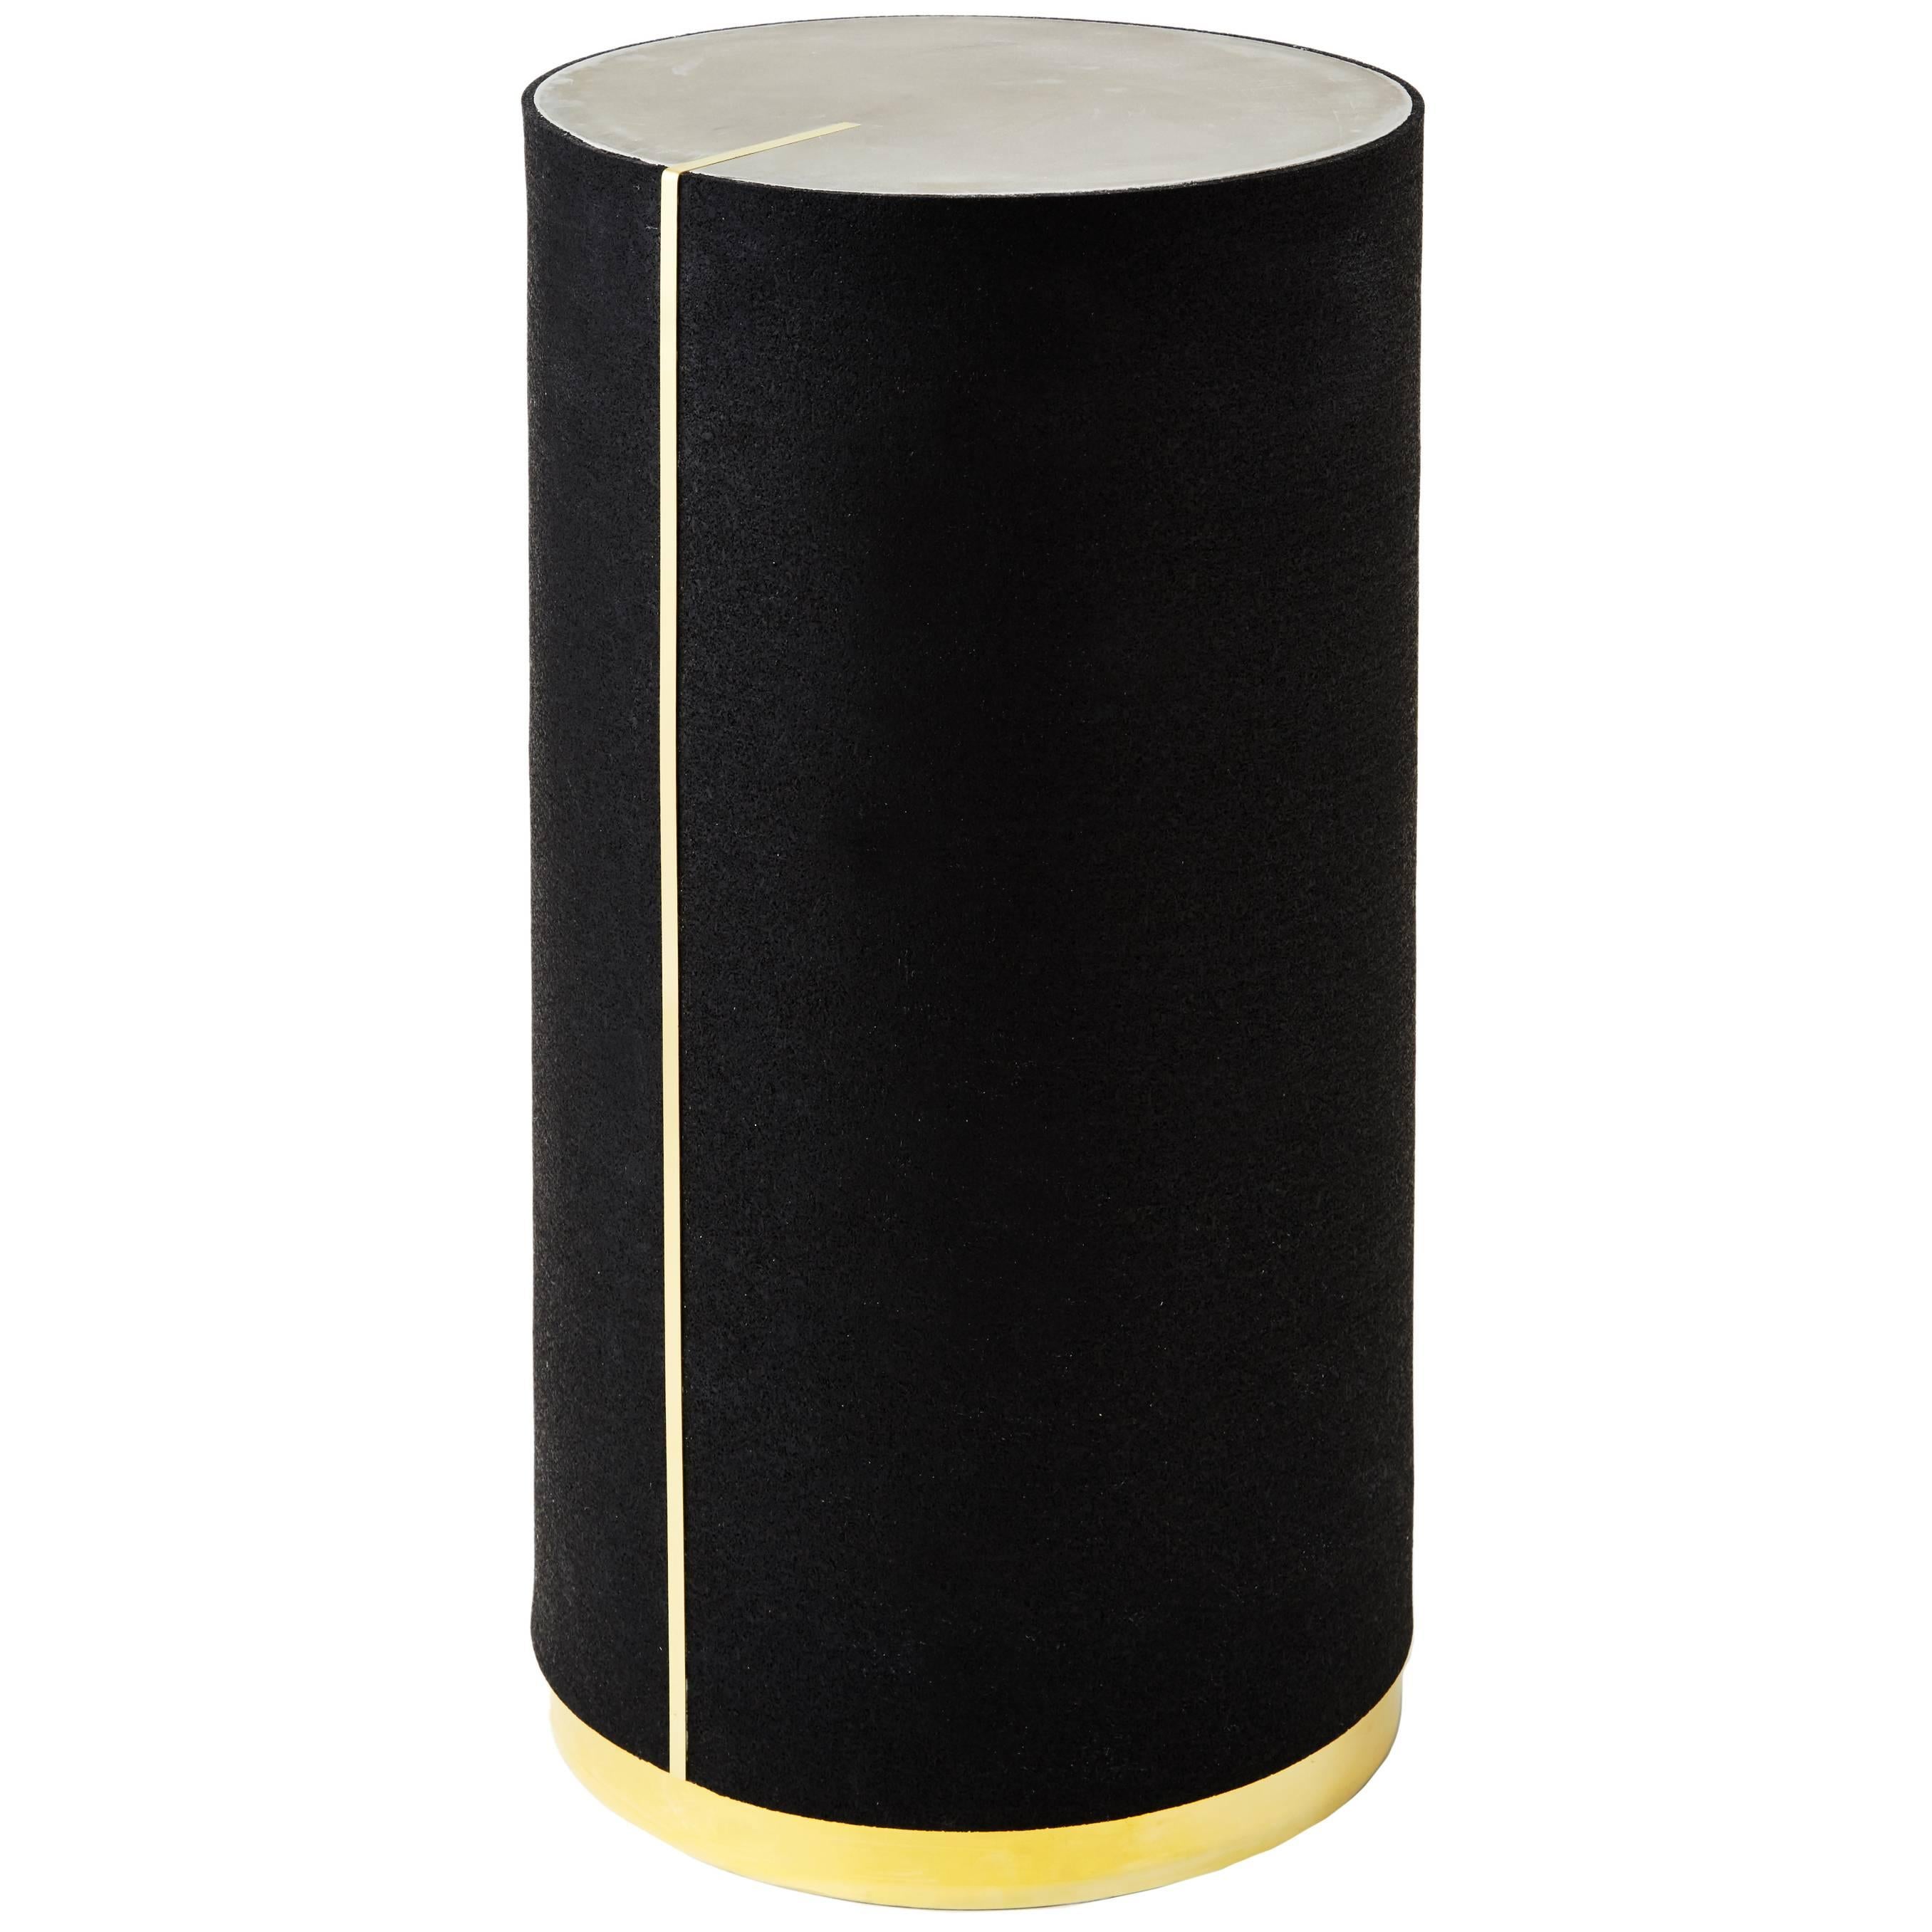 Rubber Cyl II Side Table